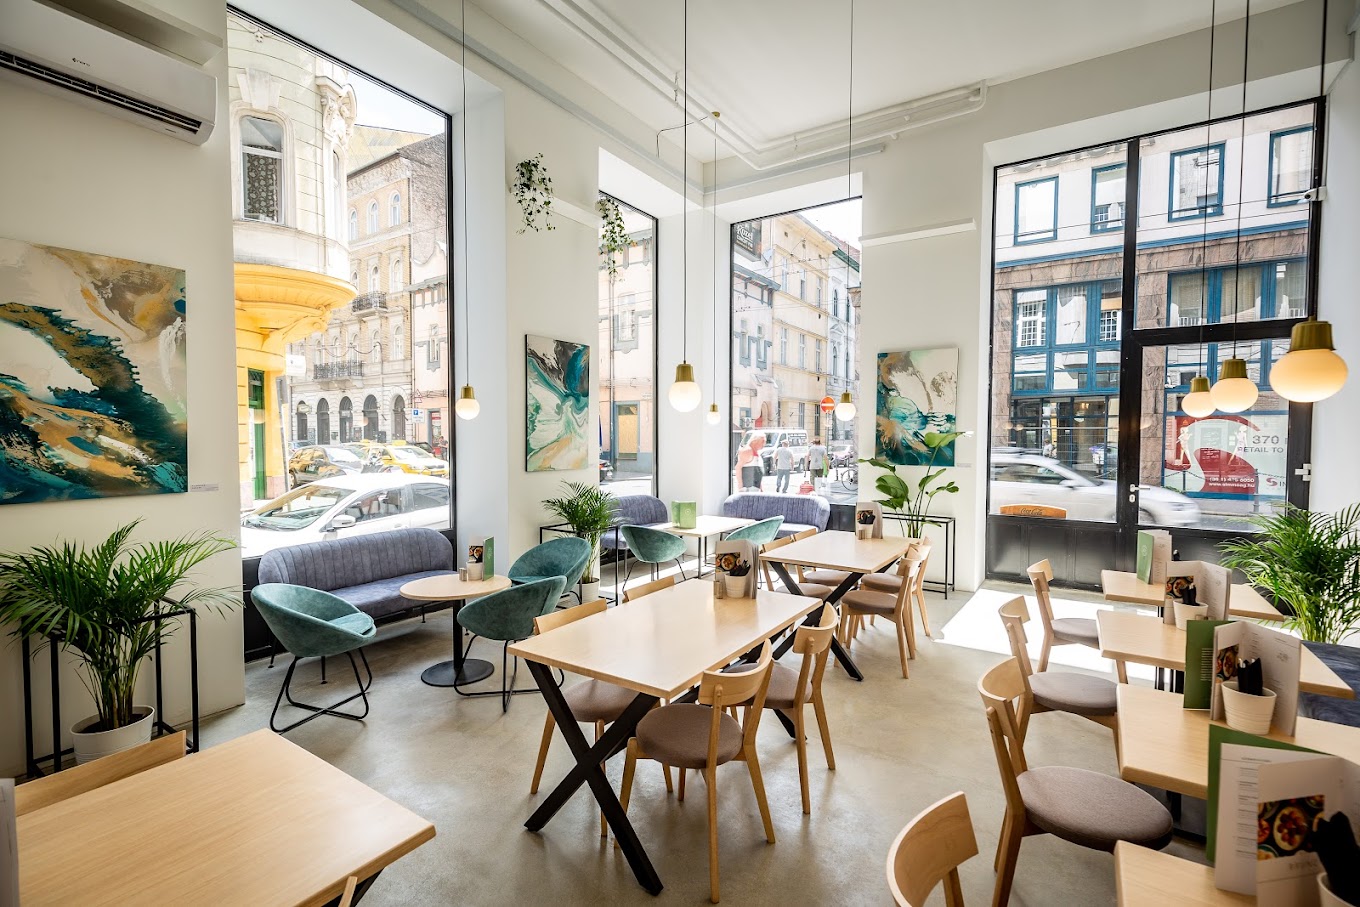 LOKUM Brunch & Bistro - 15 Best Places to Eat with Kids in Budapest